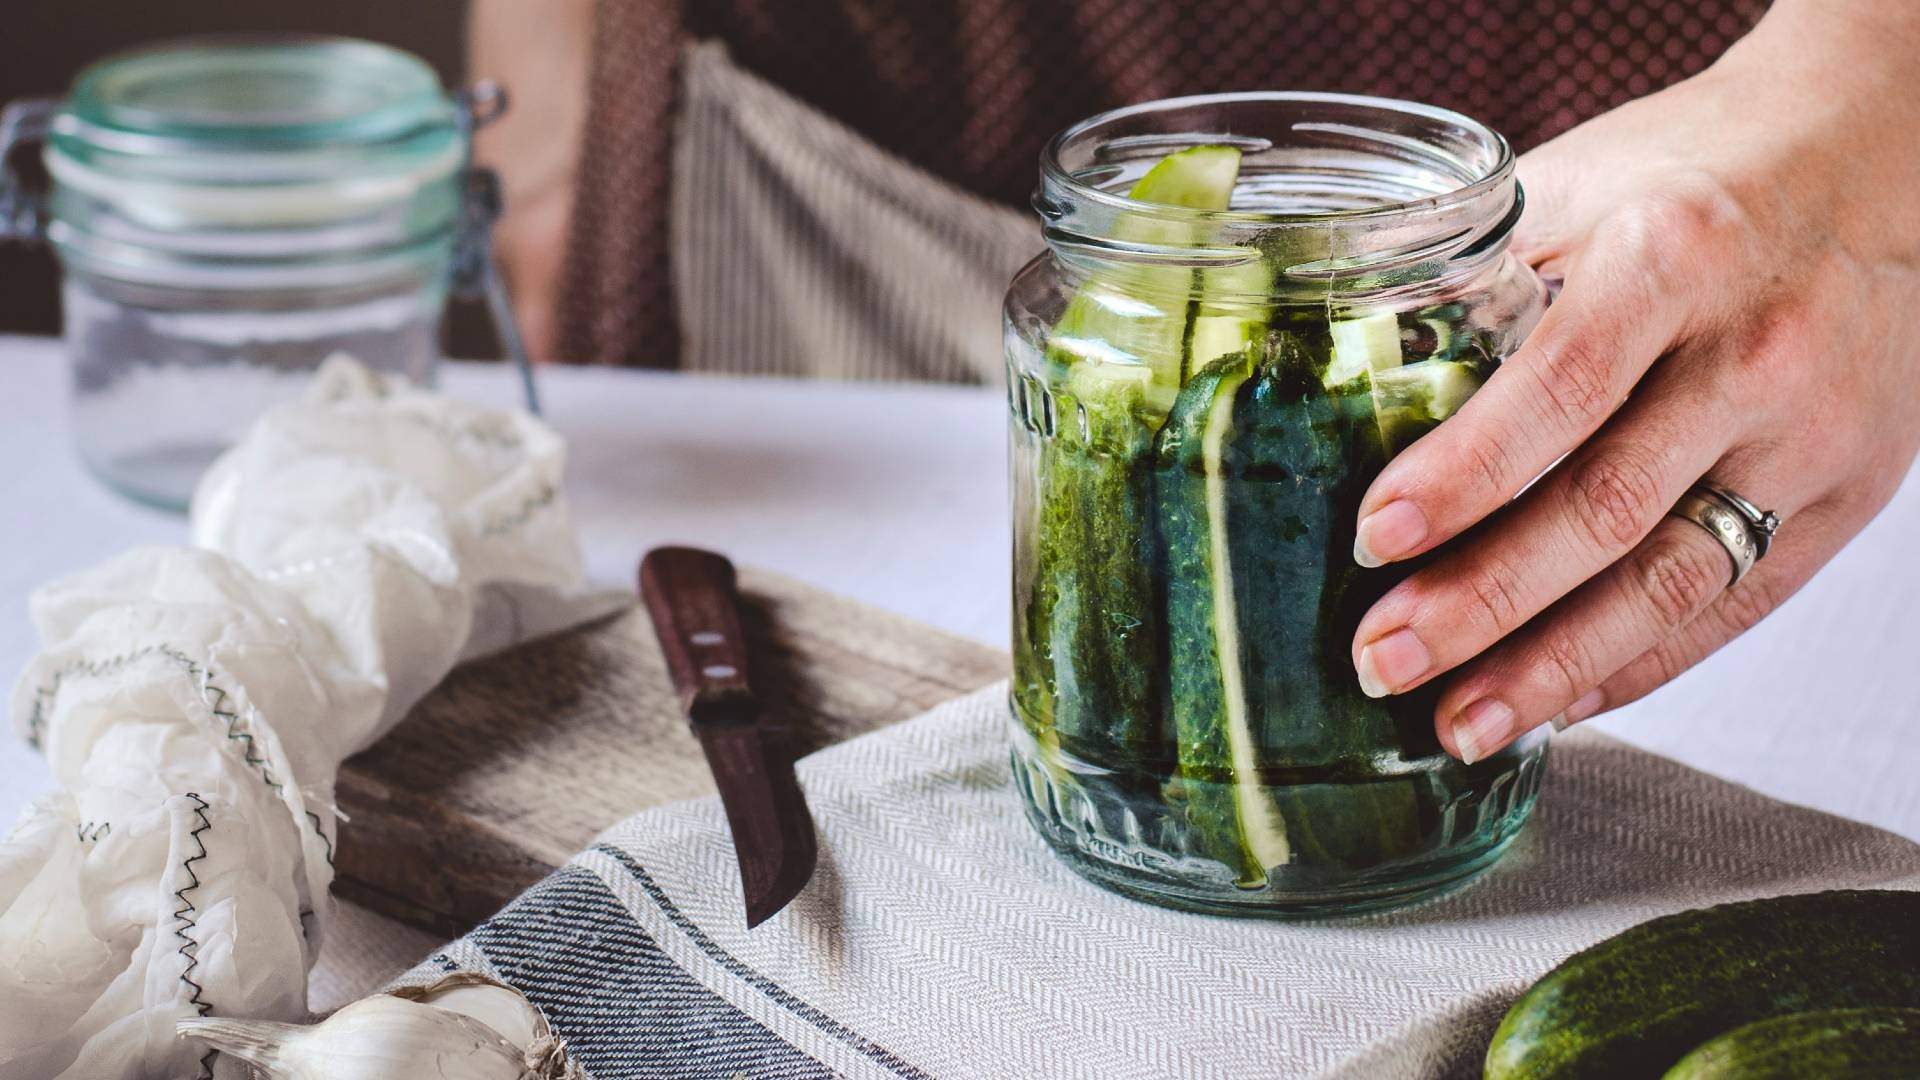 Person holding a glass jar of cucumbers ready to pickle